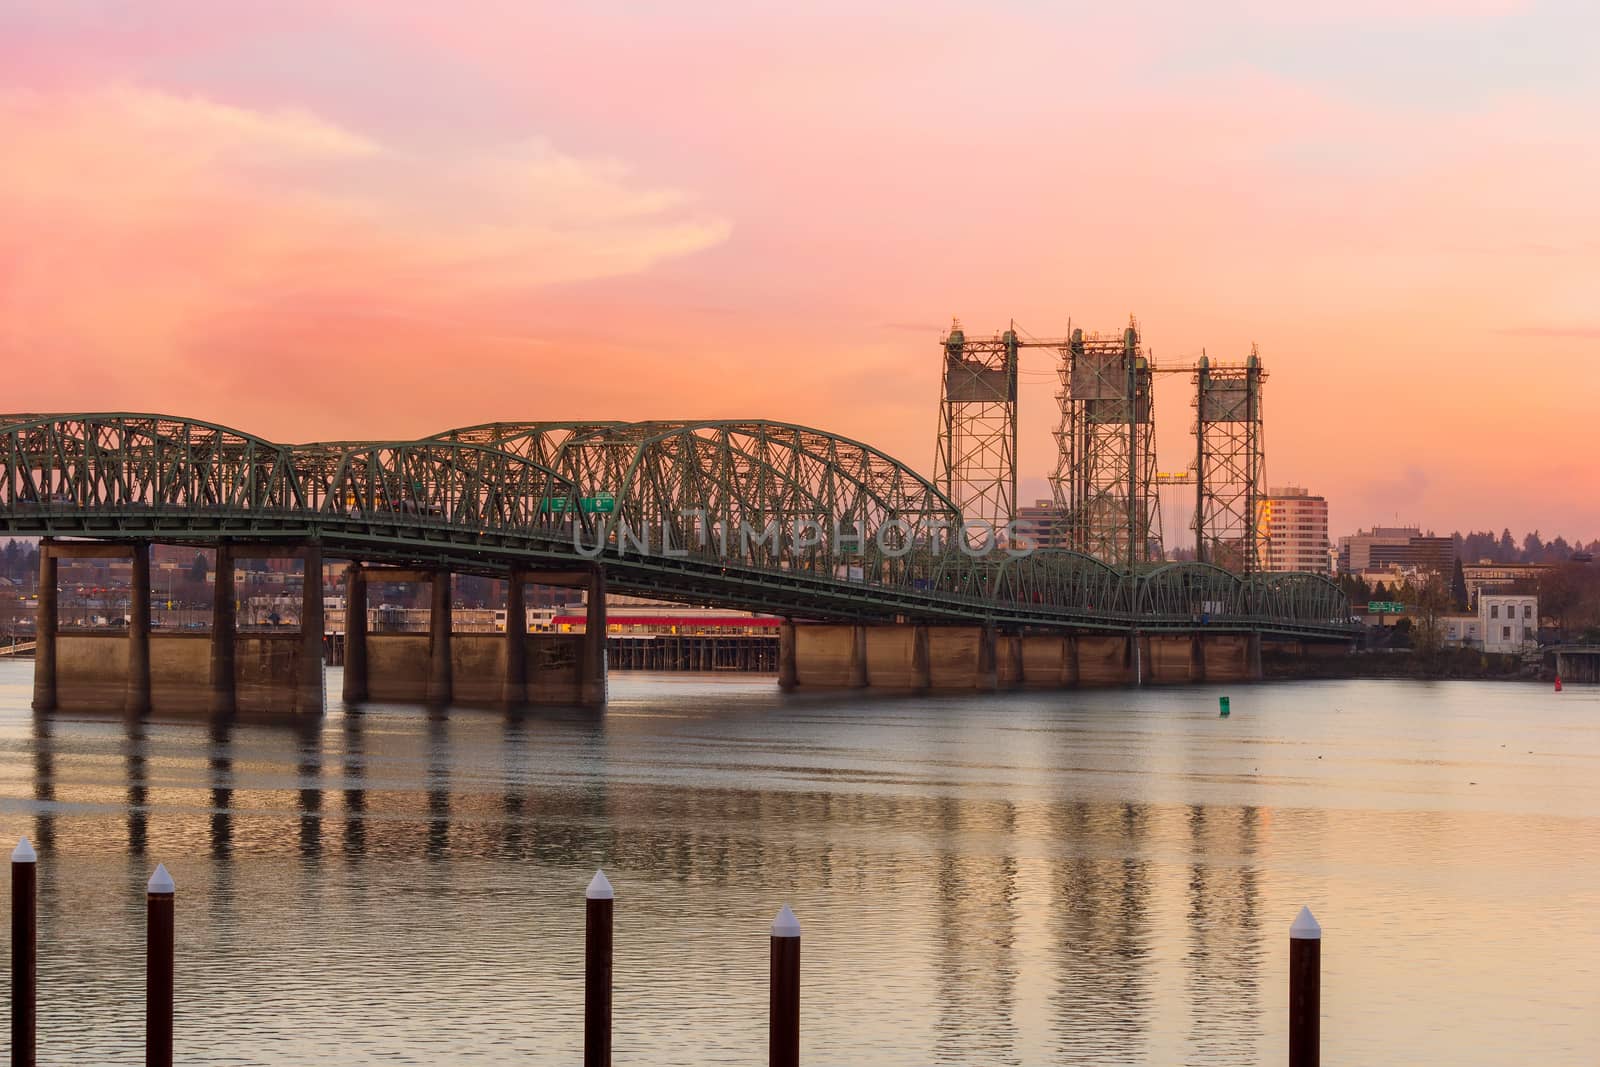 Interstate Bridge Over Columbia River at Sunset by jpldesigns